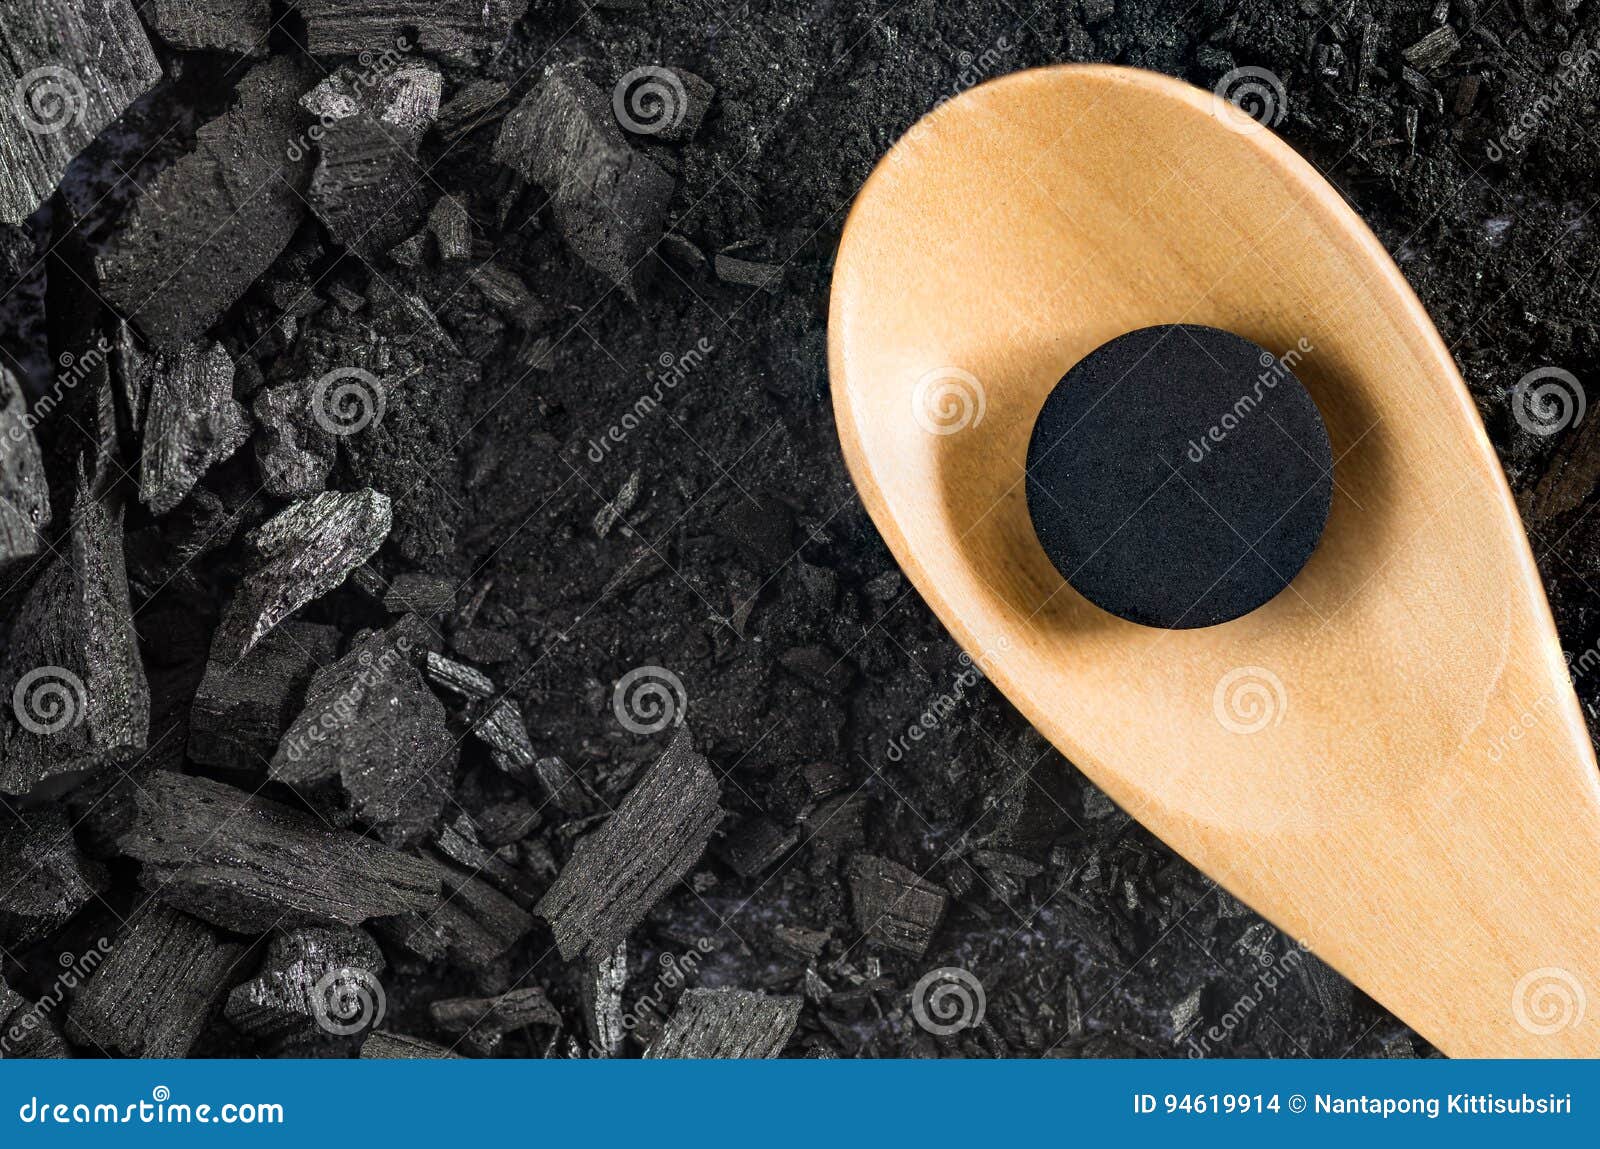 activated carbon pill medicine in wooden spoon on ground charcoal